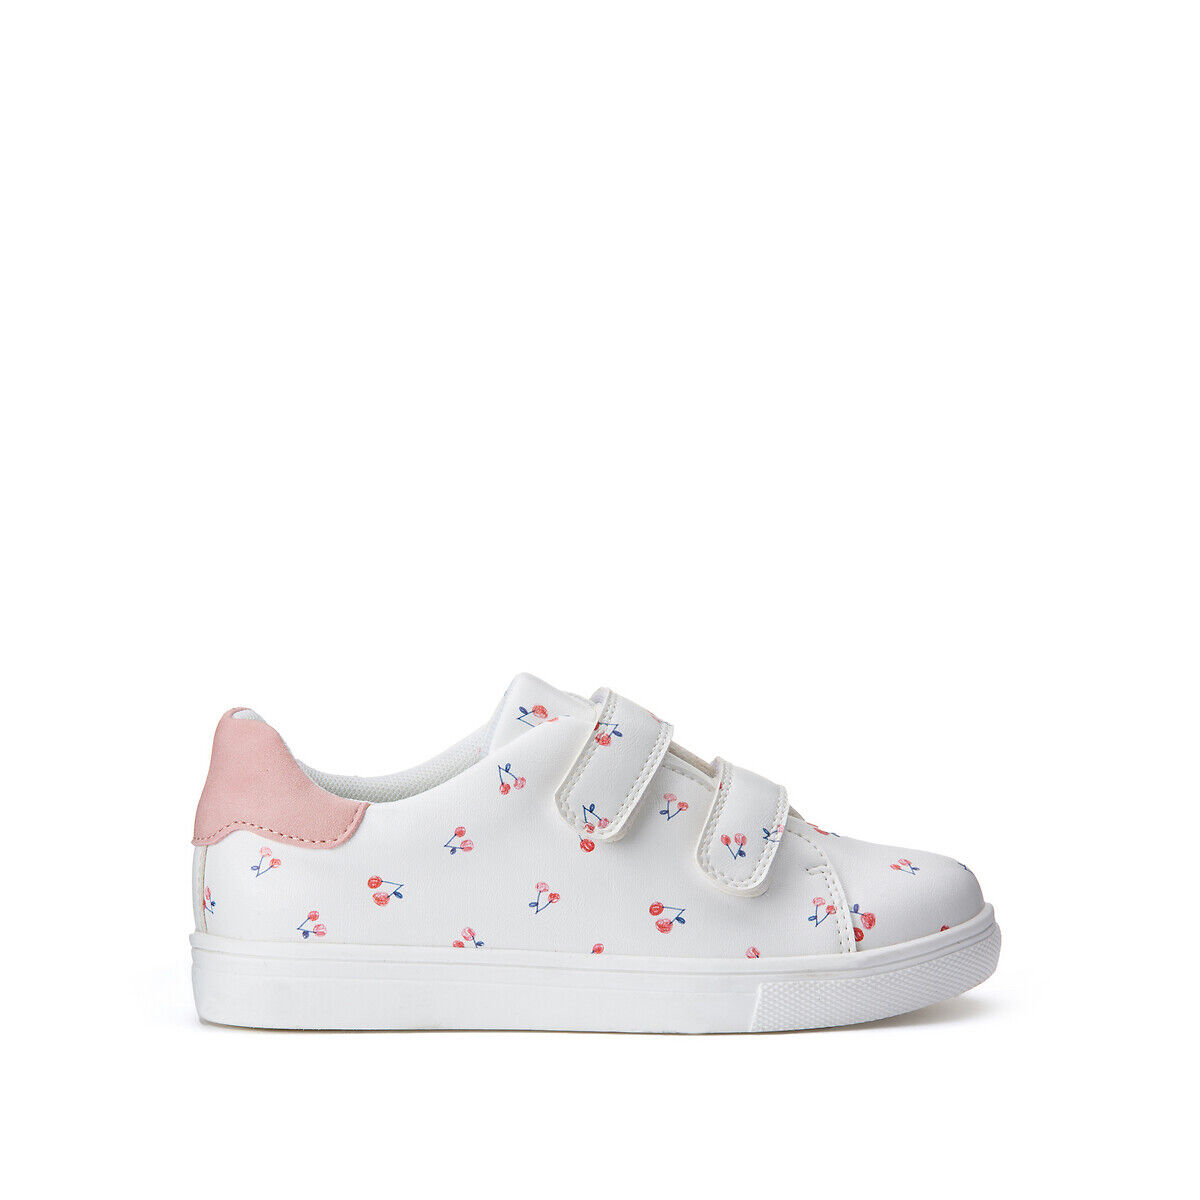 LA REDOUTE COLLECTIONS Klettsneakers, Printmuster Kirschen Gr. 26-39 WEISS